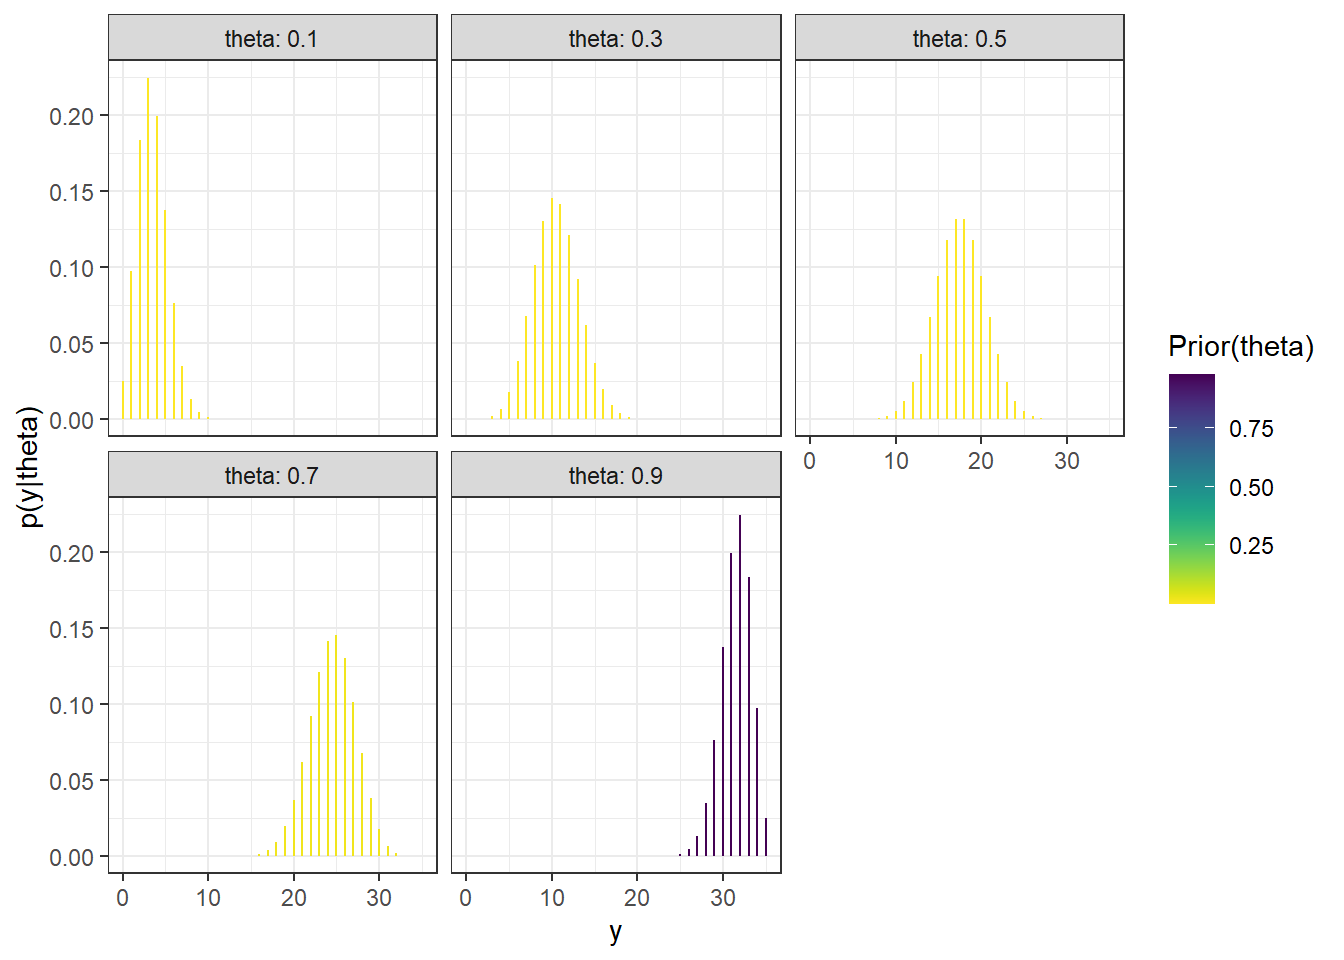 Sample-to-sample distribution of \(Y\), the number of successes in samples of size \(n=35\) for different values of \(\theta\) in Example 7.1. Color represents the posterior probability of \(\theta\), after observing data from a different sample of size 35, with darker colors corresponding to higher posterior probability.